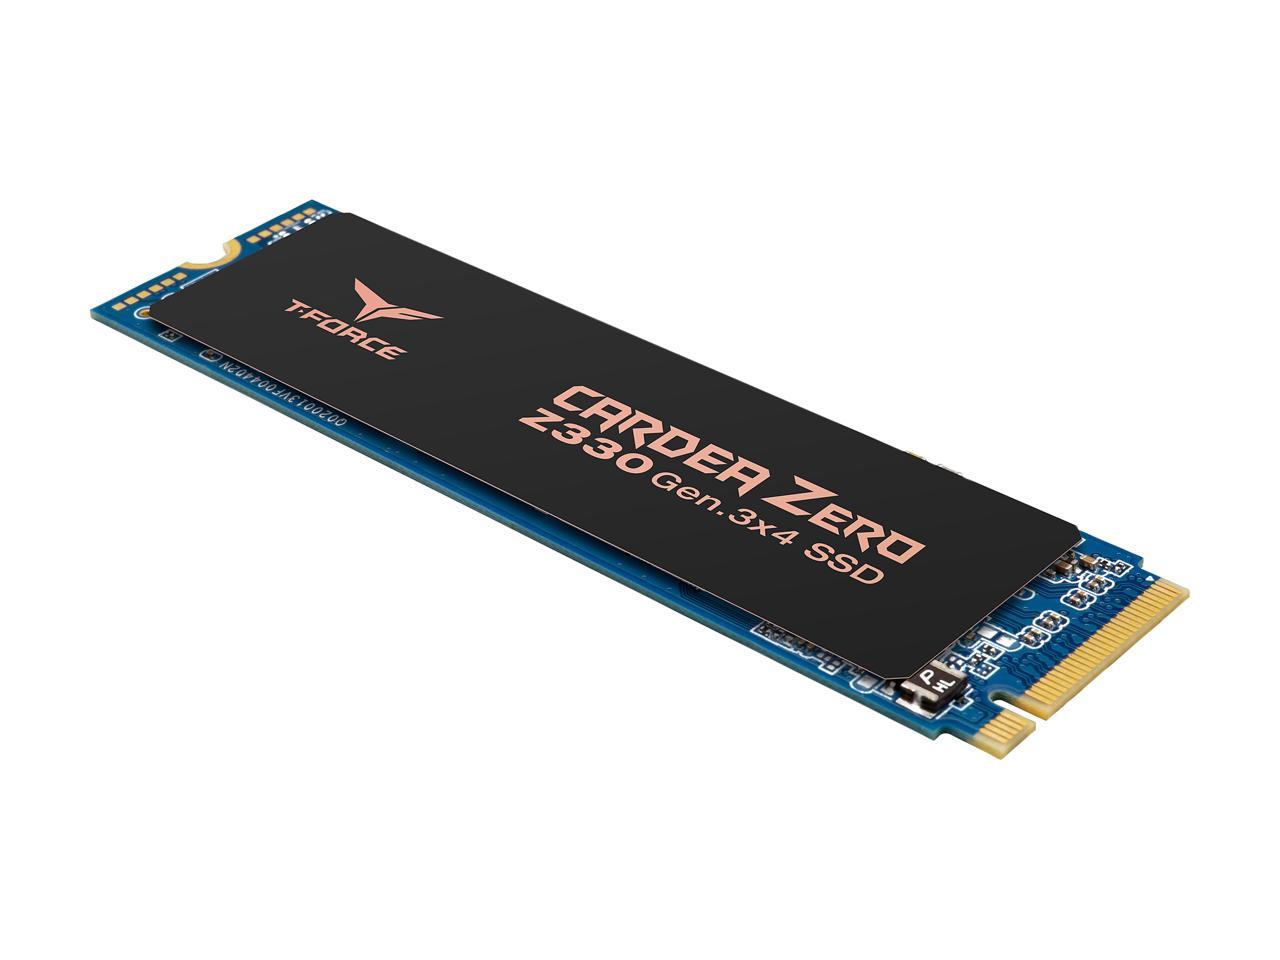 Team T-FORCE CARDEA ZERO Z330 M.2 2280 512GB PCIe Gen3 x4 with NVMe 1.3 Internal Solid State Drive (SSD) TM8FP8512G0C311